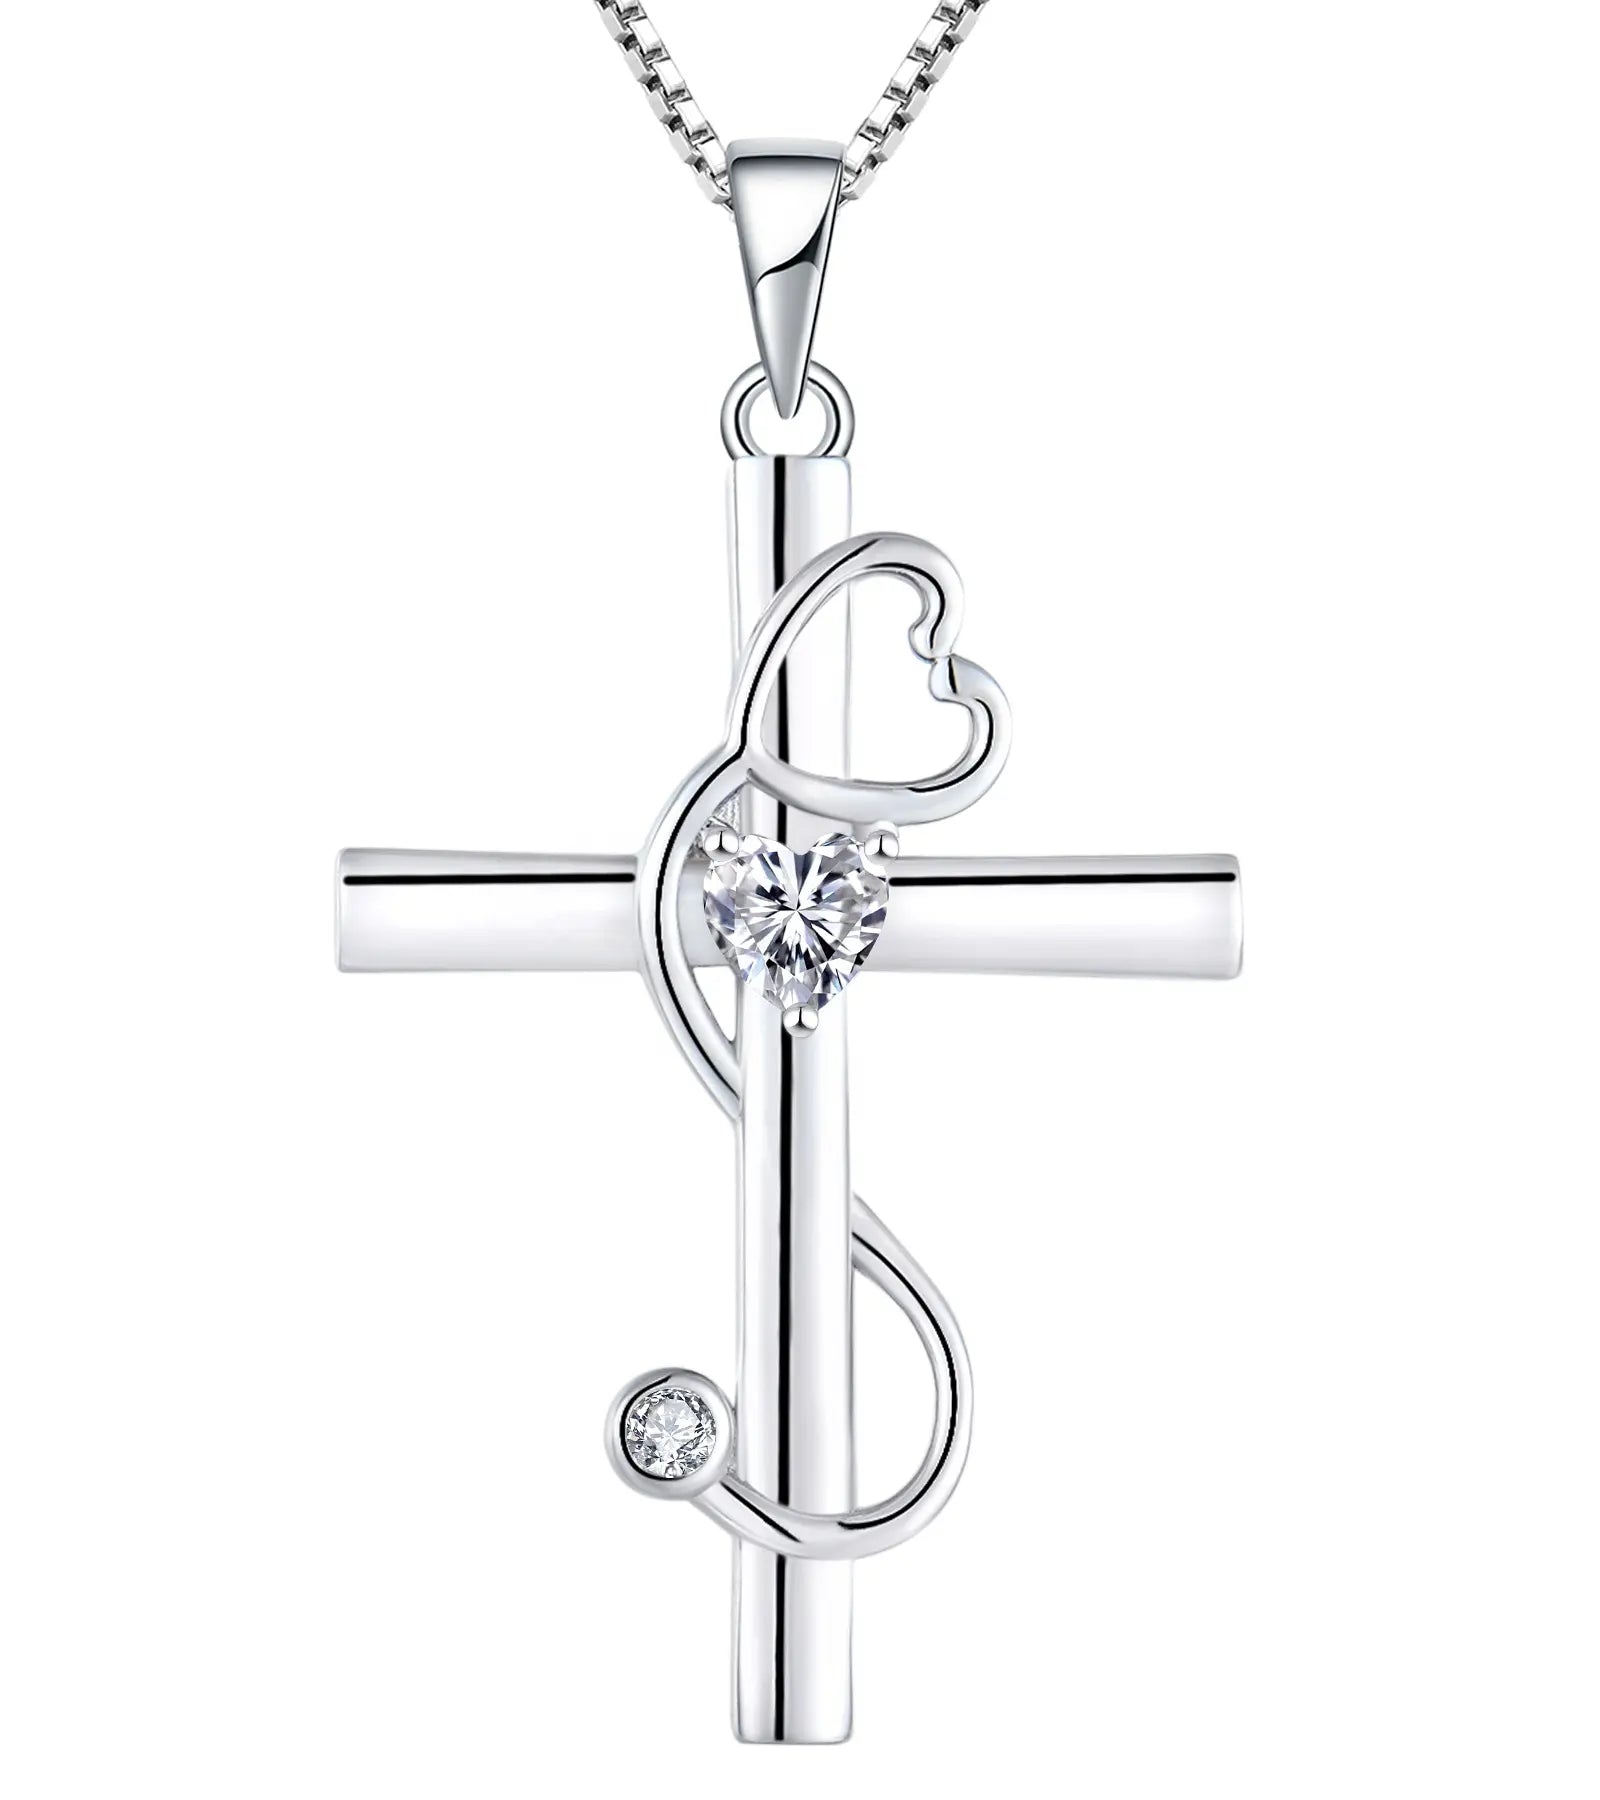 Women's Cross Necklace with Heart